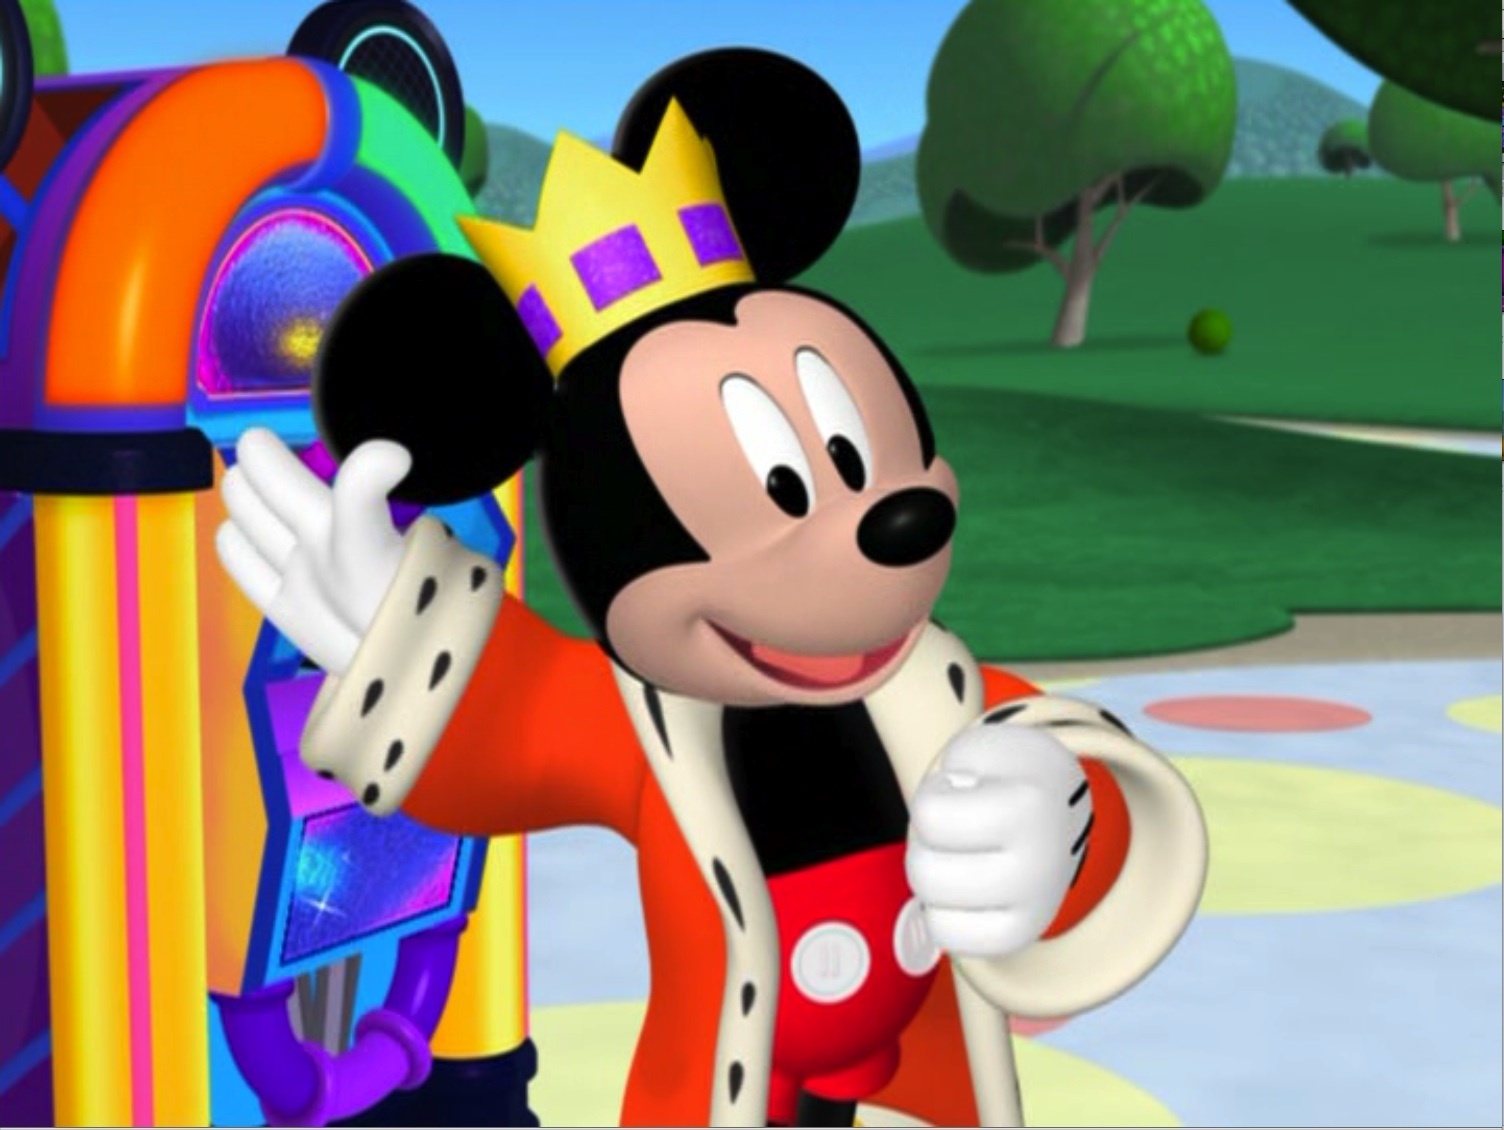 Mickey mouse Clubhouse Images on Fanpop.